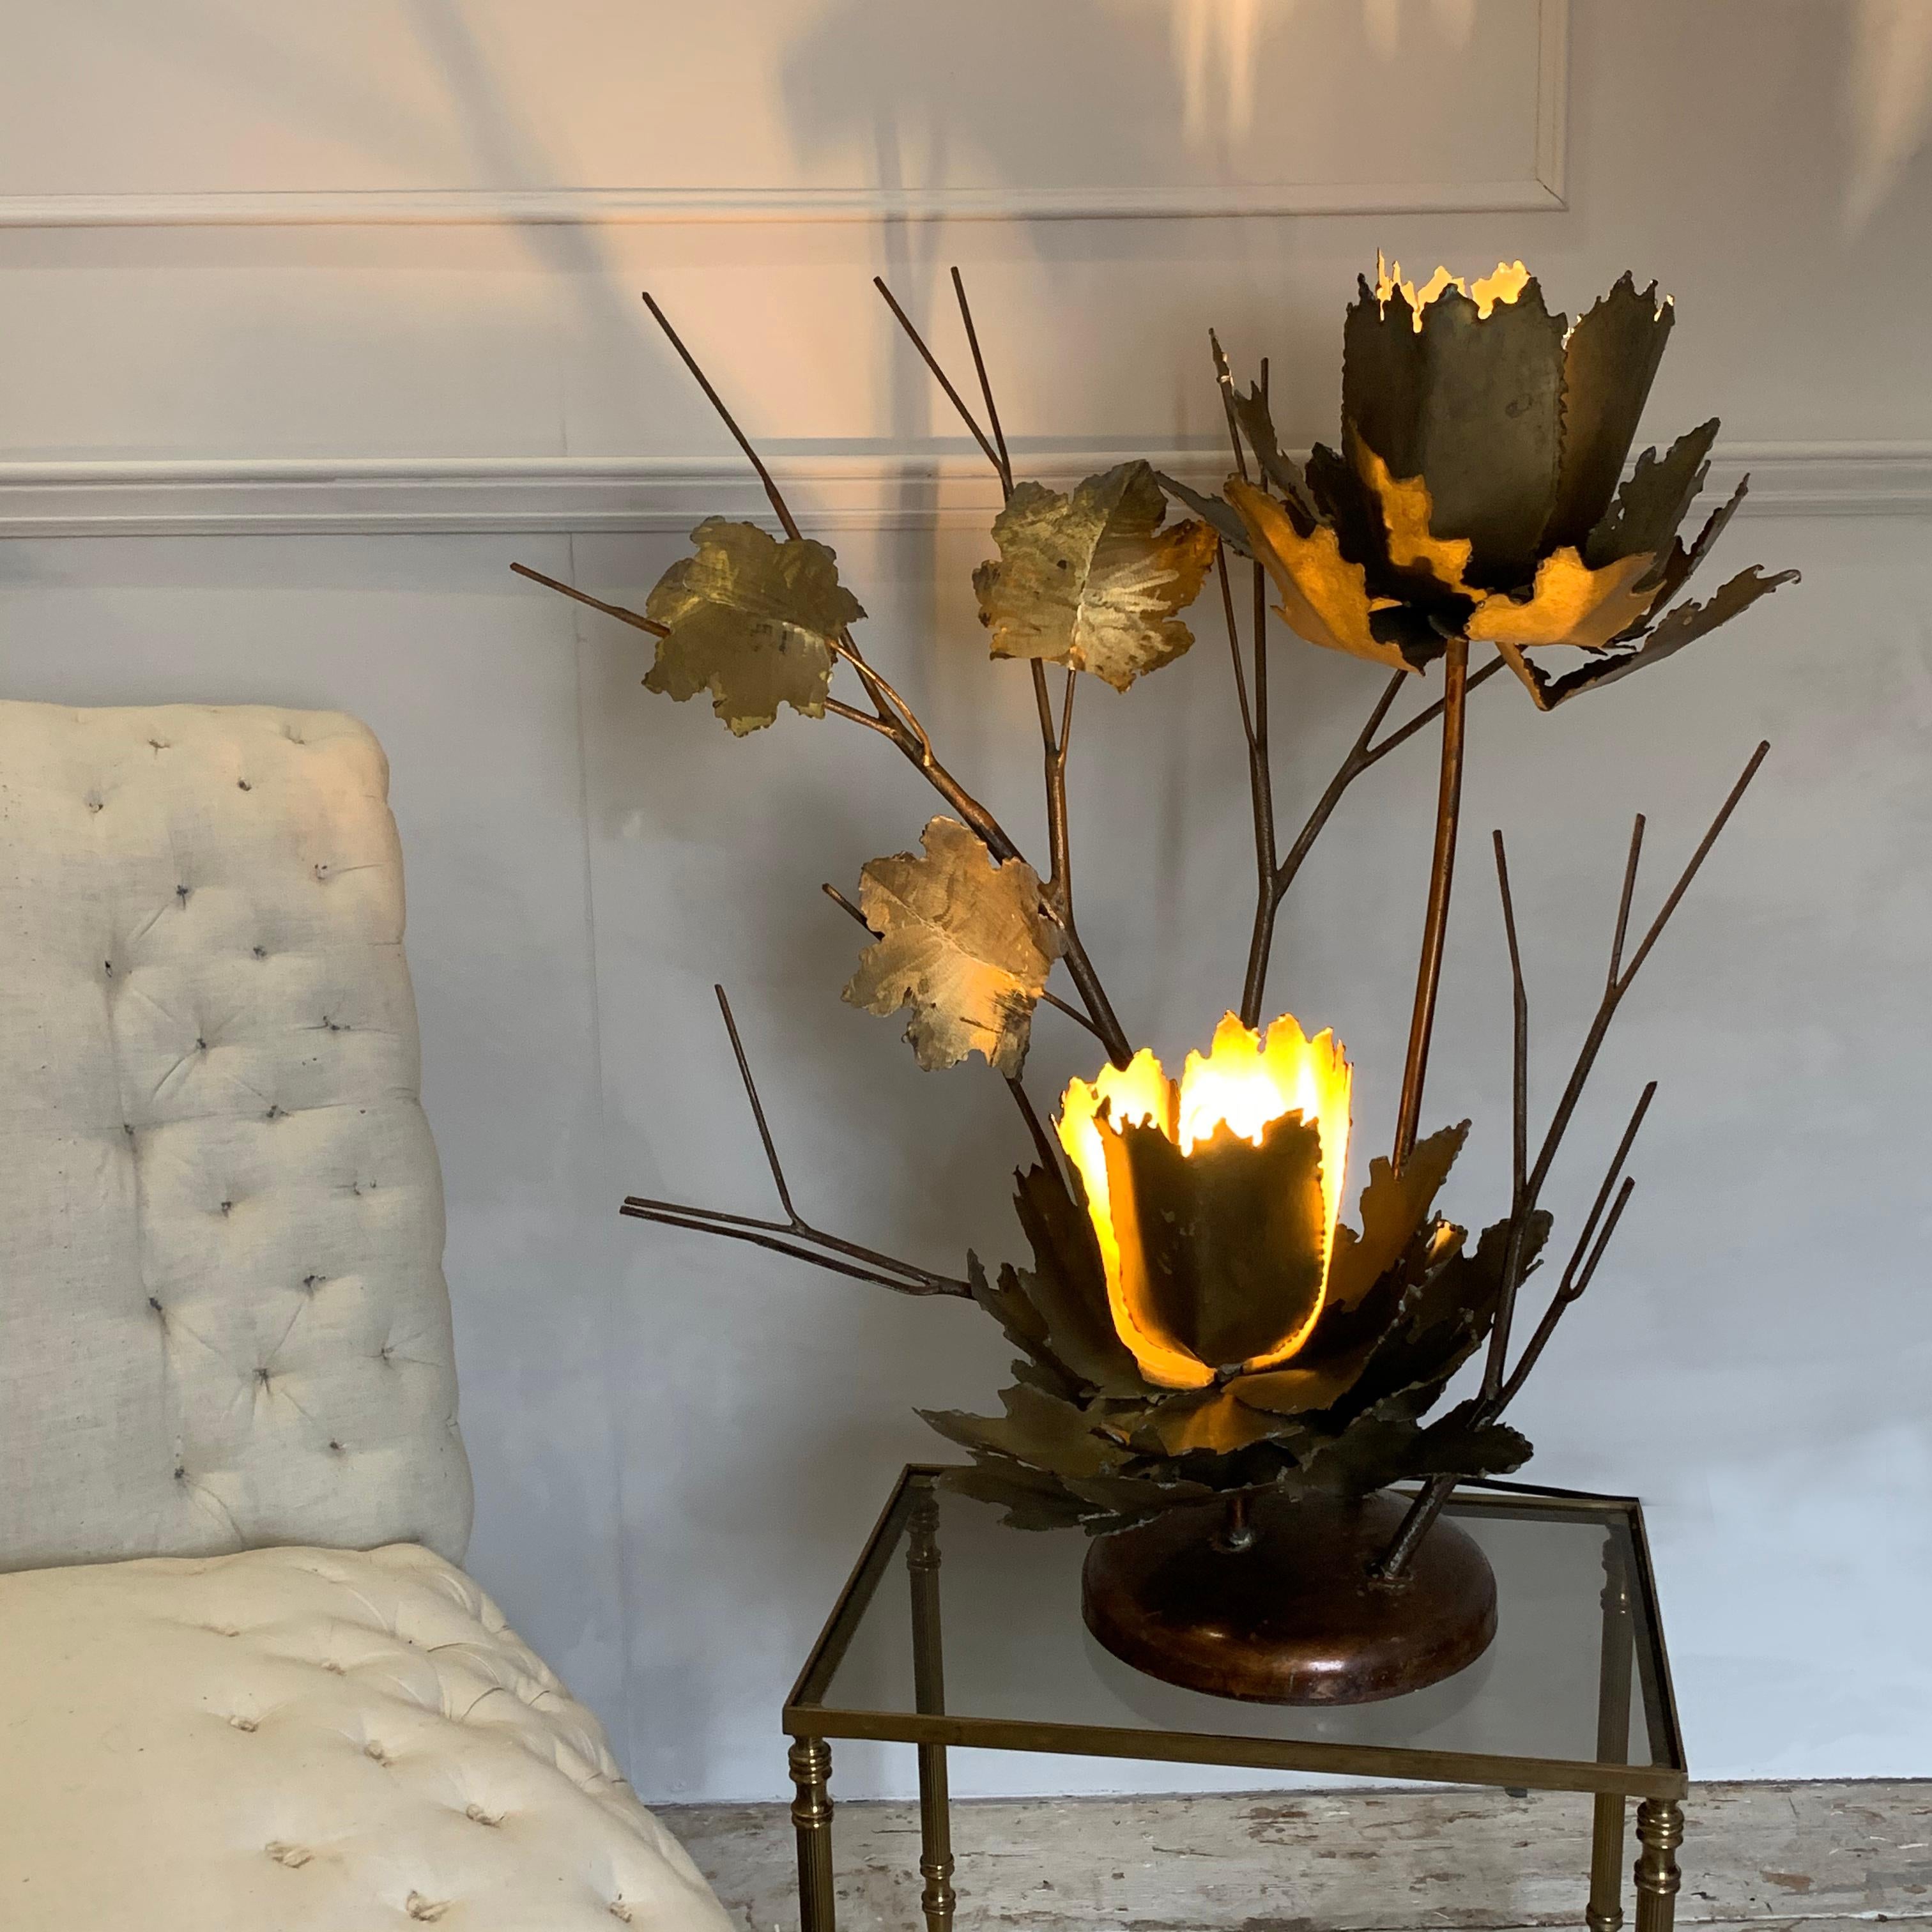 Mid Century French Brutalist flower table lamp,
circa 1960s-1970s
This beautiful large lamp is handcrafted lovingly by an artisan
The large flowers and leaves are in brass with steel twig branches in steel painted with a copper color to match the